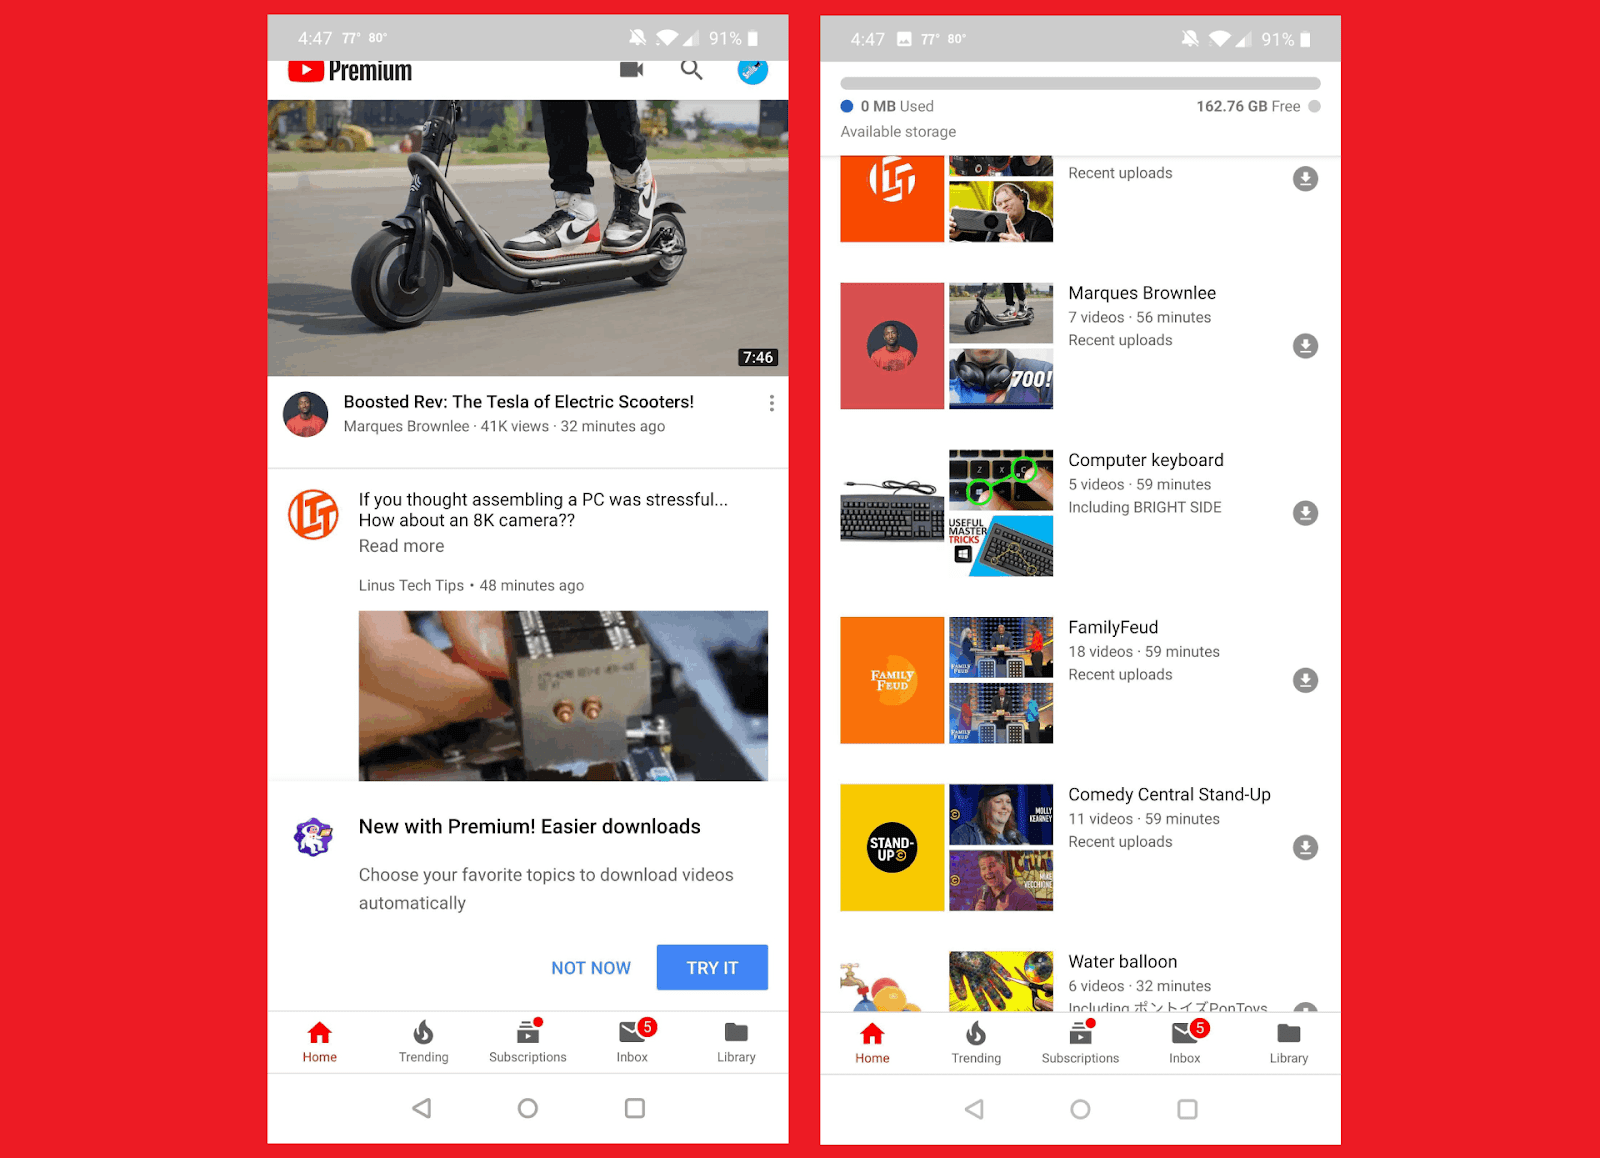 YouTube Premium lets users save recent channel and topic videos for offline viewing